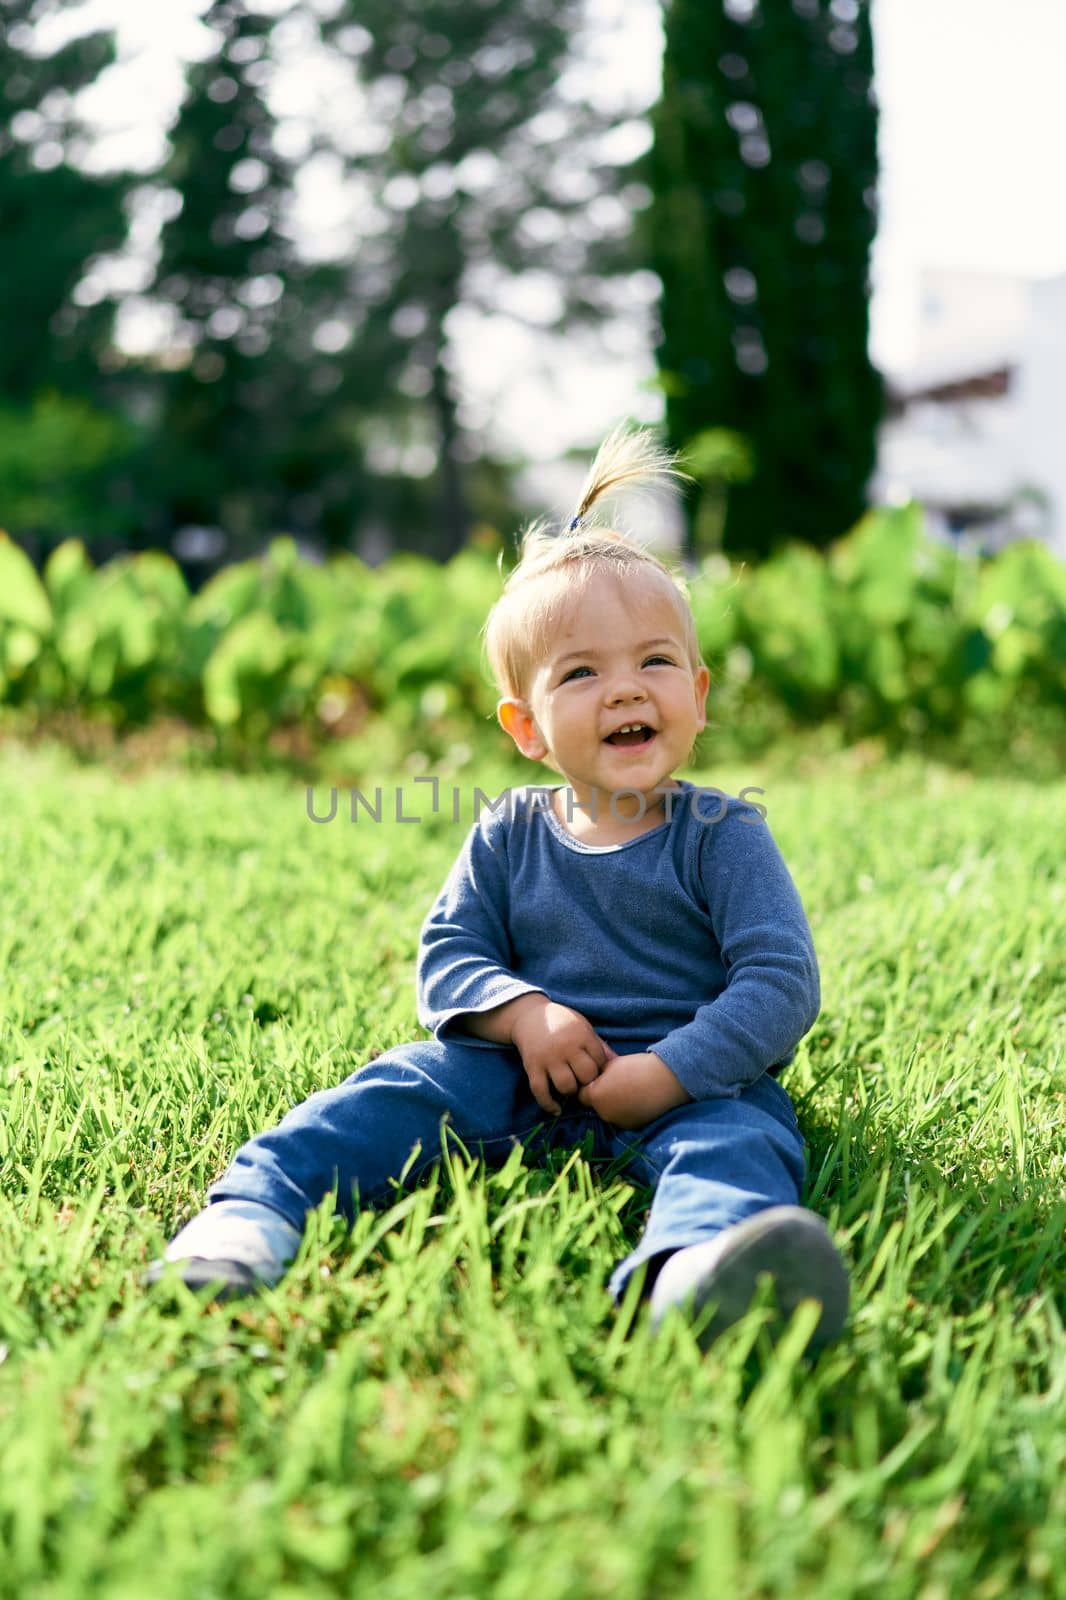 Laughing kid with a ponytail sits on a green lawn. High quality photo